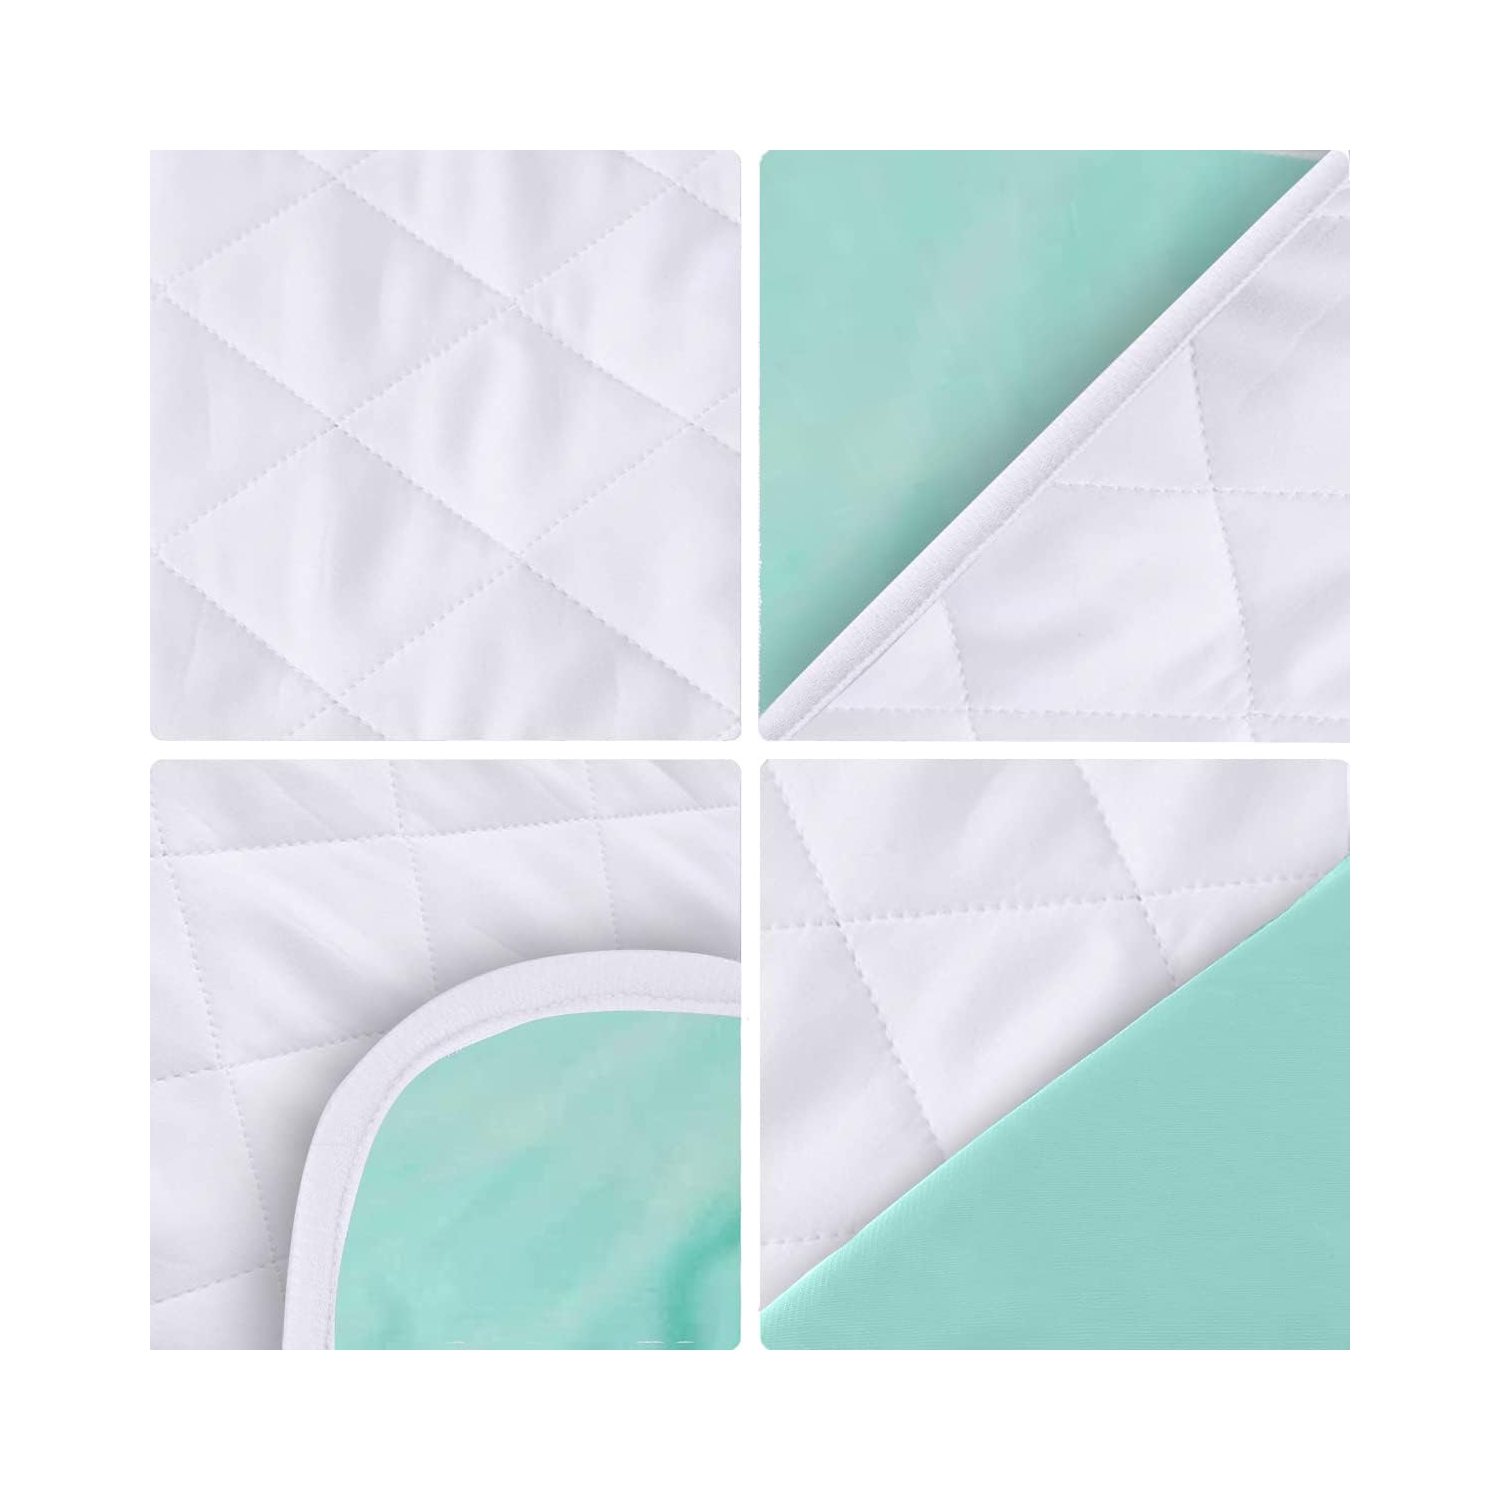 HYGIENX Deluxe Waterproof Sheet Protector 24”x34” 4 Pack 5 Layer Protection  Soaker Bed Pads Reusable Incontinence UnderPads for Adults Kids Pets  Seniors Children Mattress Protector Green